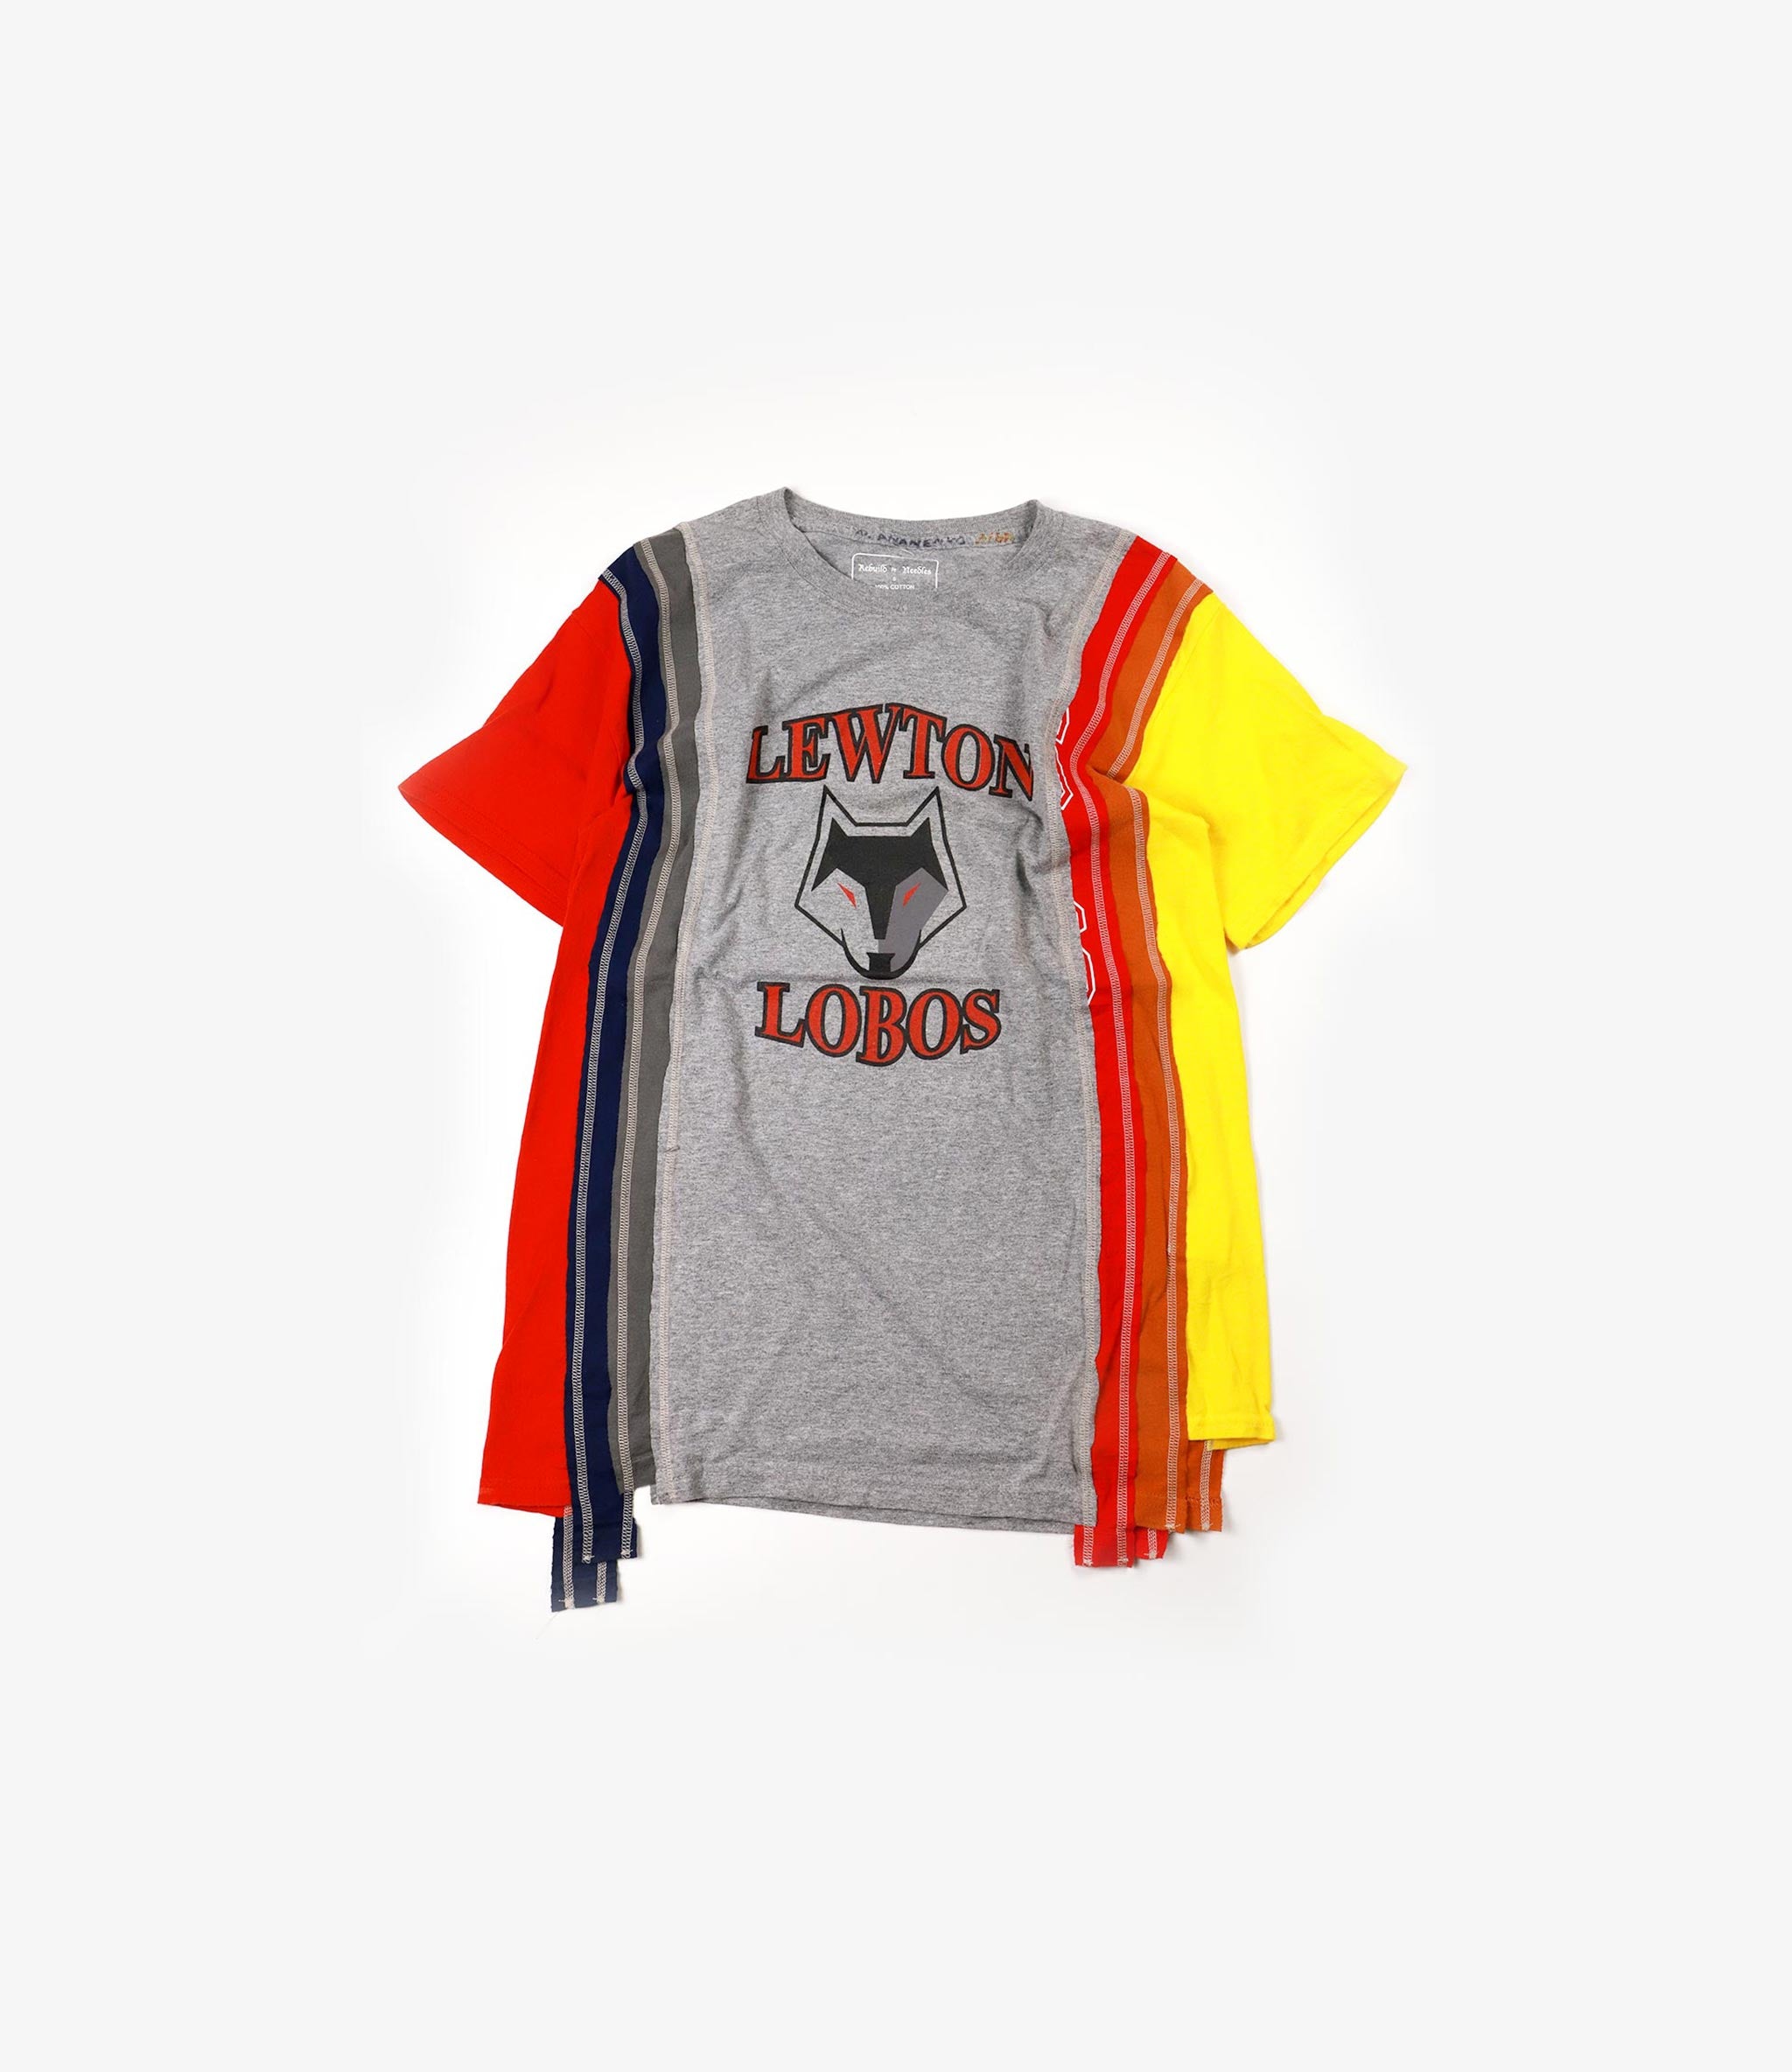 Rebuild by Needles 7 Cuts Short Sleeve College Tee - S